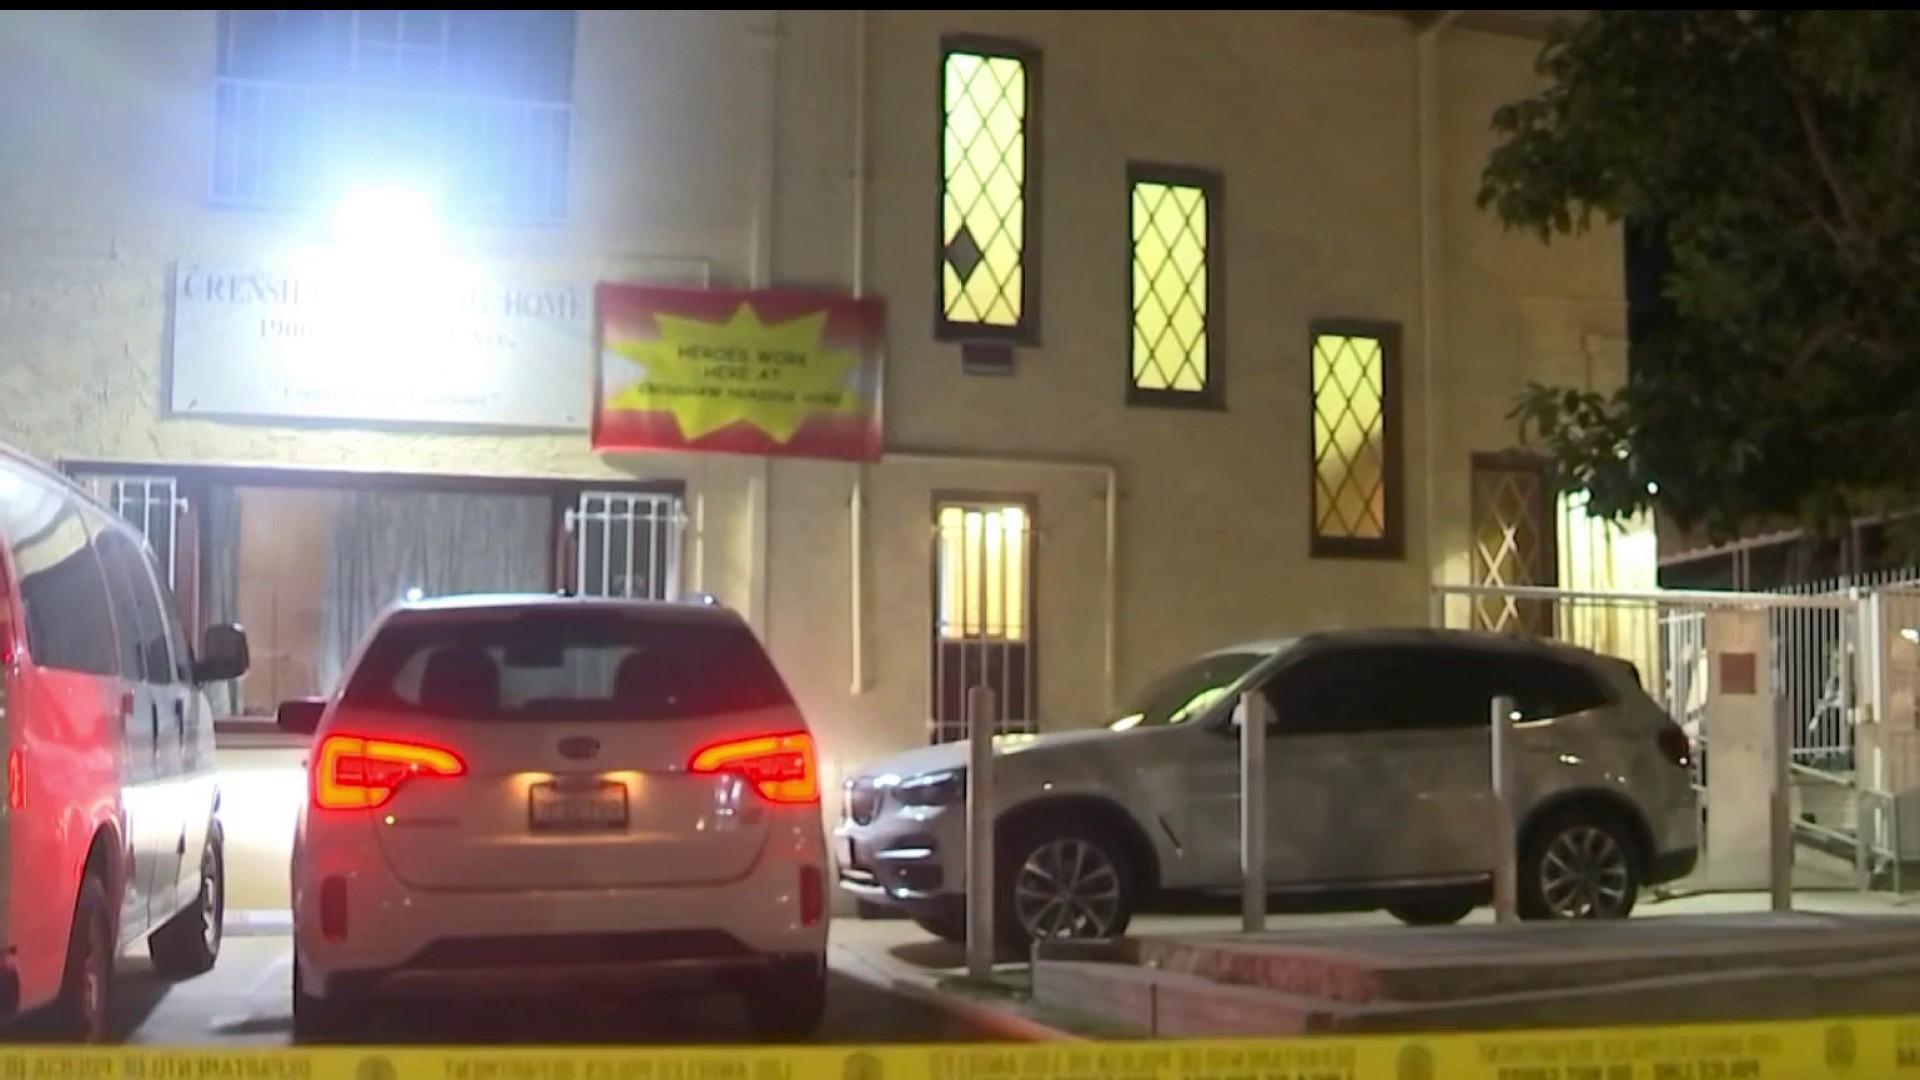 Fatal Mid-City Stabbing in Crenshaw Nursing Home Leaves One Dead, One Injured